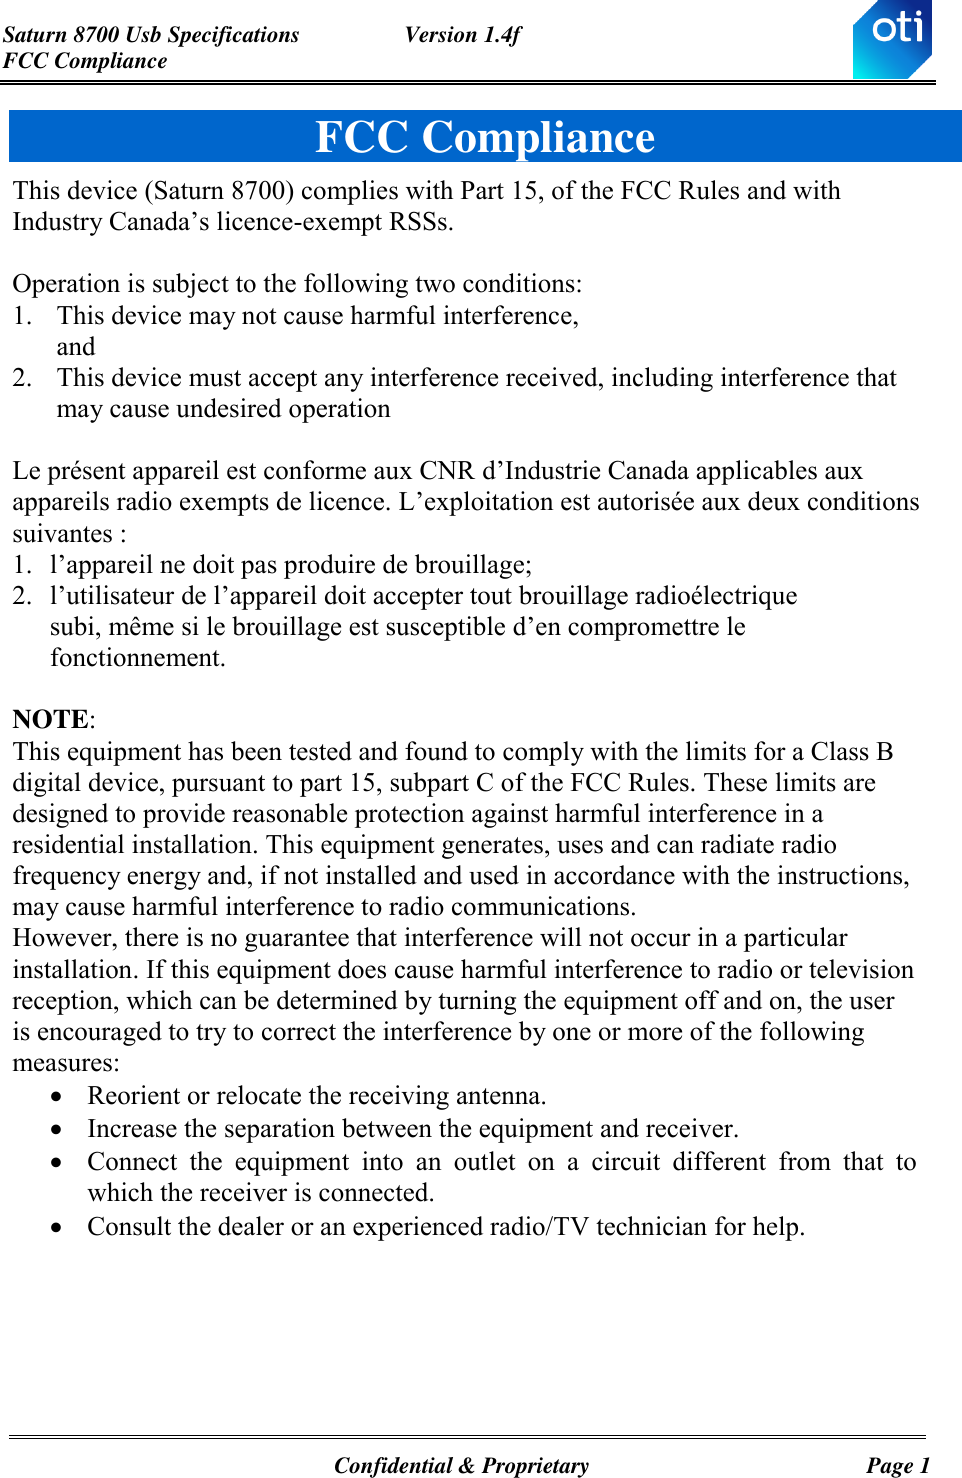 Saturn 8700 Usb Specifications  Version 1.4f FCC Compliance   Confidential &amp; Proprietary  Page 1 FCC Compliance This device (Saturn 8700) complies with Part 15, of the FCC Rules and with Industry Canada’s licence-exempt RSSs.  Operation is subject to the following two conditions: 1. This device may not cause harmful interference, and 2. This device must accept any interference received, including interference that may cause undesired operation  Le présent appareil est conforme aux CNR d’Industrie Canada applicables aux appareils radio exempts de licence. L’exploitation est autorisée aux deux conditions suivantes : 1. l’appareil ne doit pas produire de brouillage;  2. l’utilisateur de l’appareil doit accepter tout brouillage radioélectrique subi, même si le brouillage est susceptible d’en compromettre le fonctionnement.  NOTE:  This equipment has been tested and found to comply with the limits for a Class B digital device, pursuant to part 15, subpart C of the FCC Rules. These limits are designed to provide reasonable protection against harmful interference in a residential installation. This equipment generates, uses and can radiate radio frequency energy and, if not installed and used in accordance with the instructions, may cause harmful interference to radio communications. However, there is no guarantee that interference will not occur in a particular installation. If this equipment does cause harmful interference to radio or television reception, which can be determined by turning the equipment off and on, the user is encouraged to try to correct the interference by one or more of the following measures:   Reorient or relocate the receiving antenna.  Increase the separation between the equipment and receiver.  Connect  the  equipment  into  an  outlet  on  a  circuit  different  from  that  to which the receiver is connected.  Consult the dealer or an experienced radio/TV technician for help. 